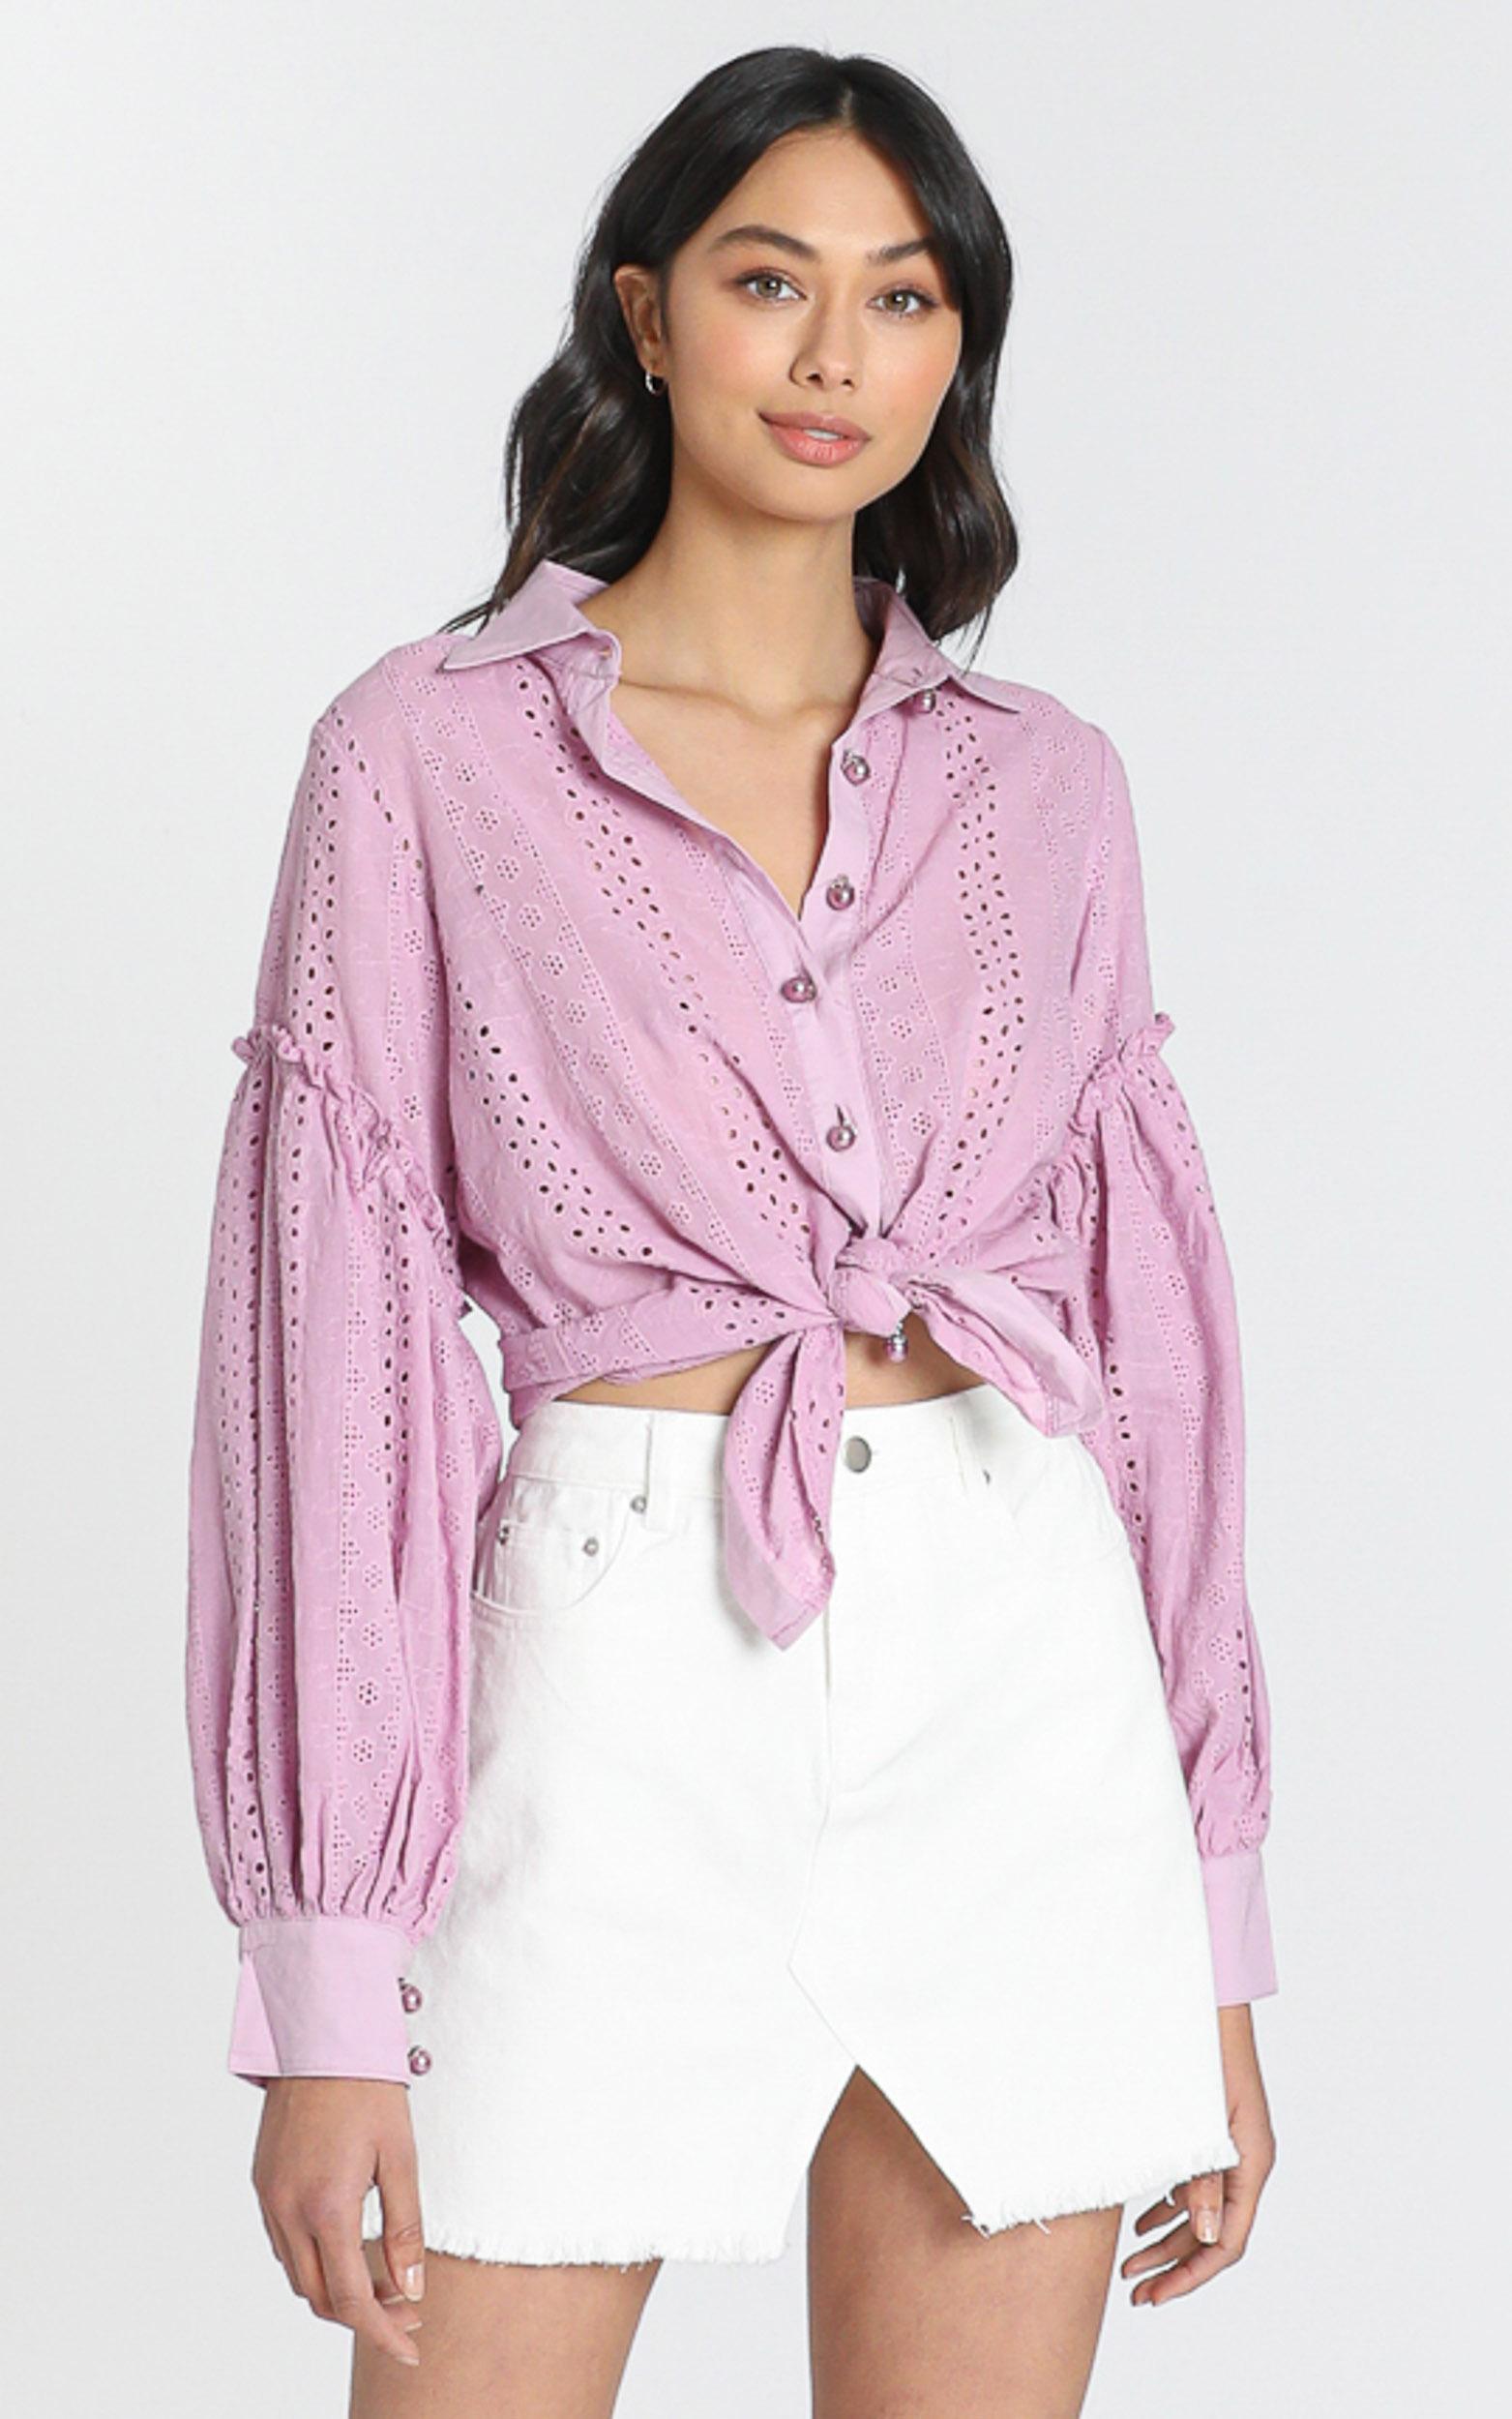 Beautiful Things embroidery shirt in lilac - 6 (XS), Purple, hi-res image number null